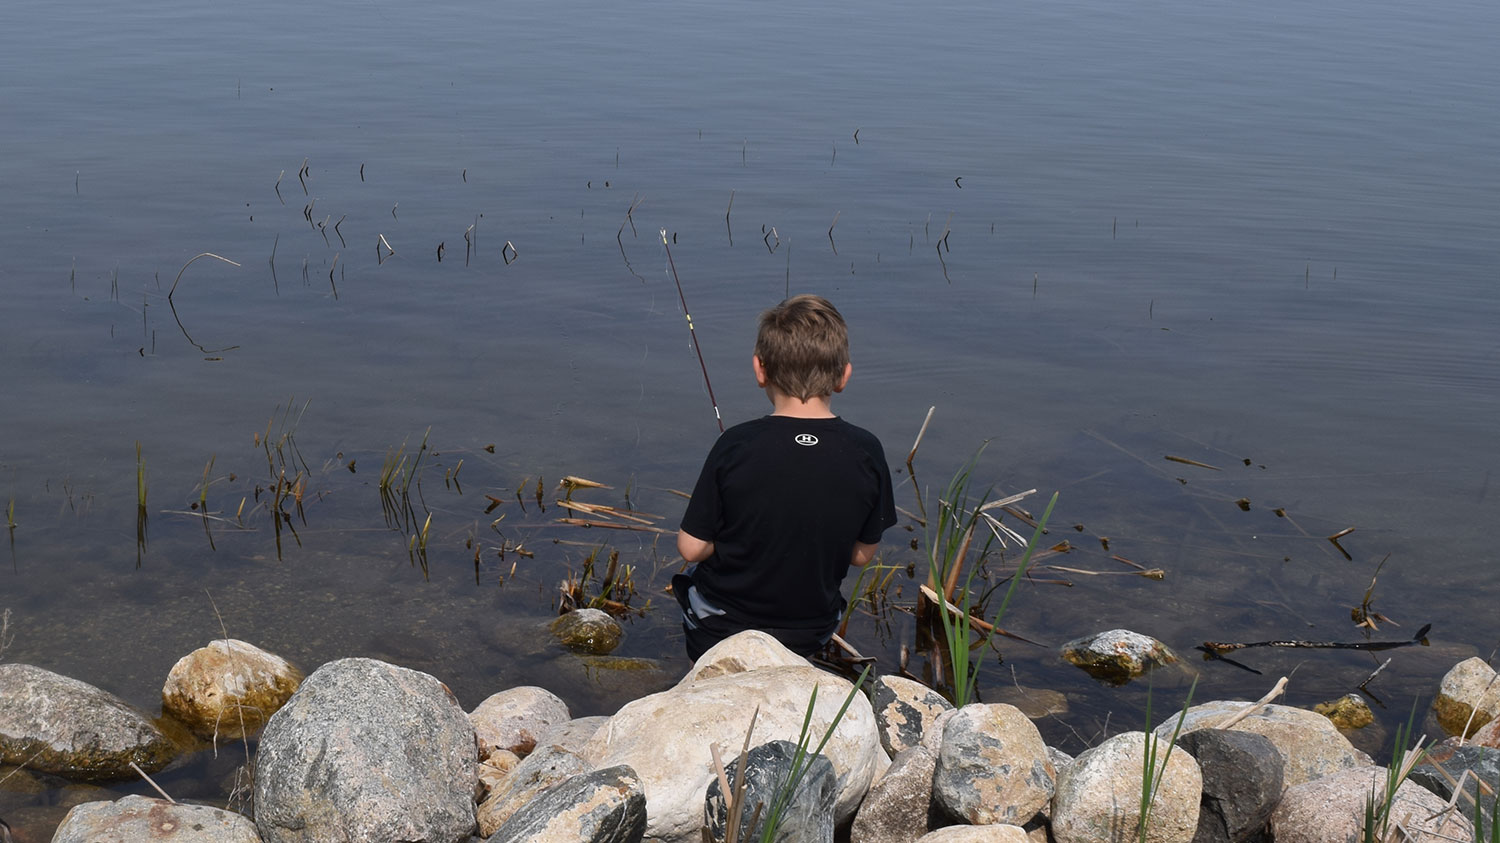 Child fishing from shore